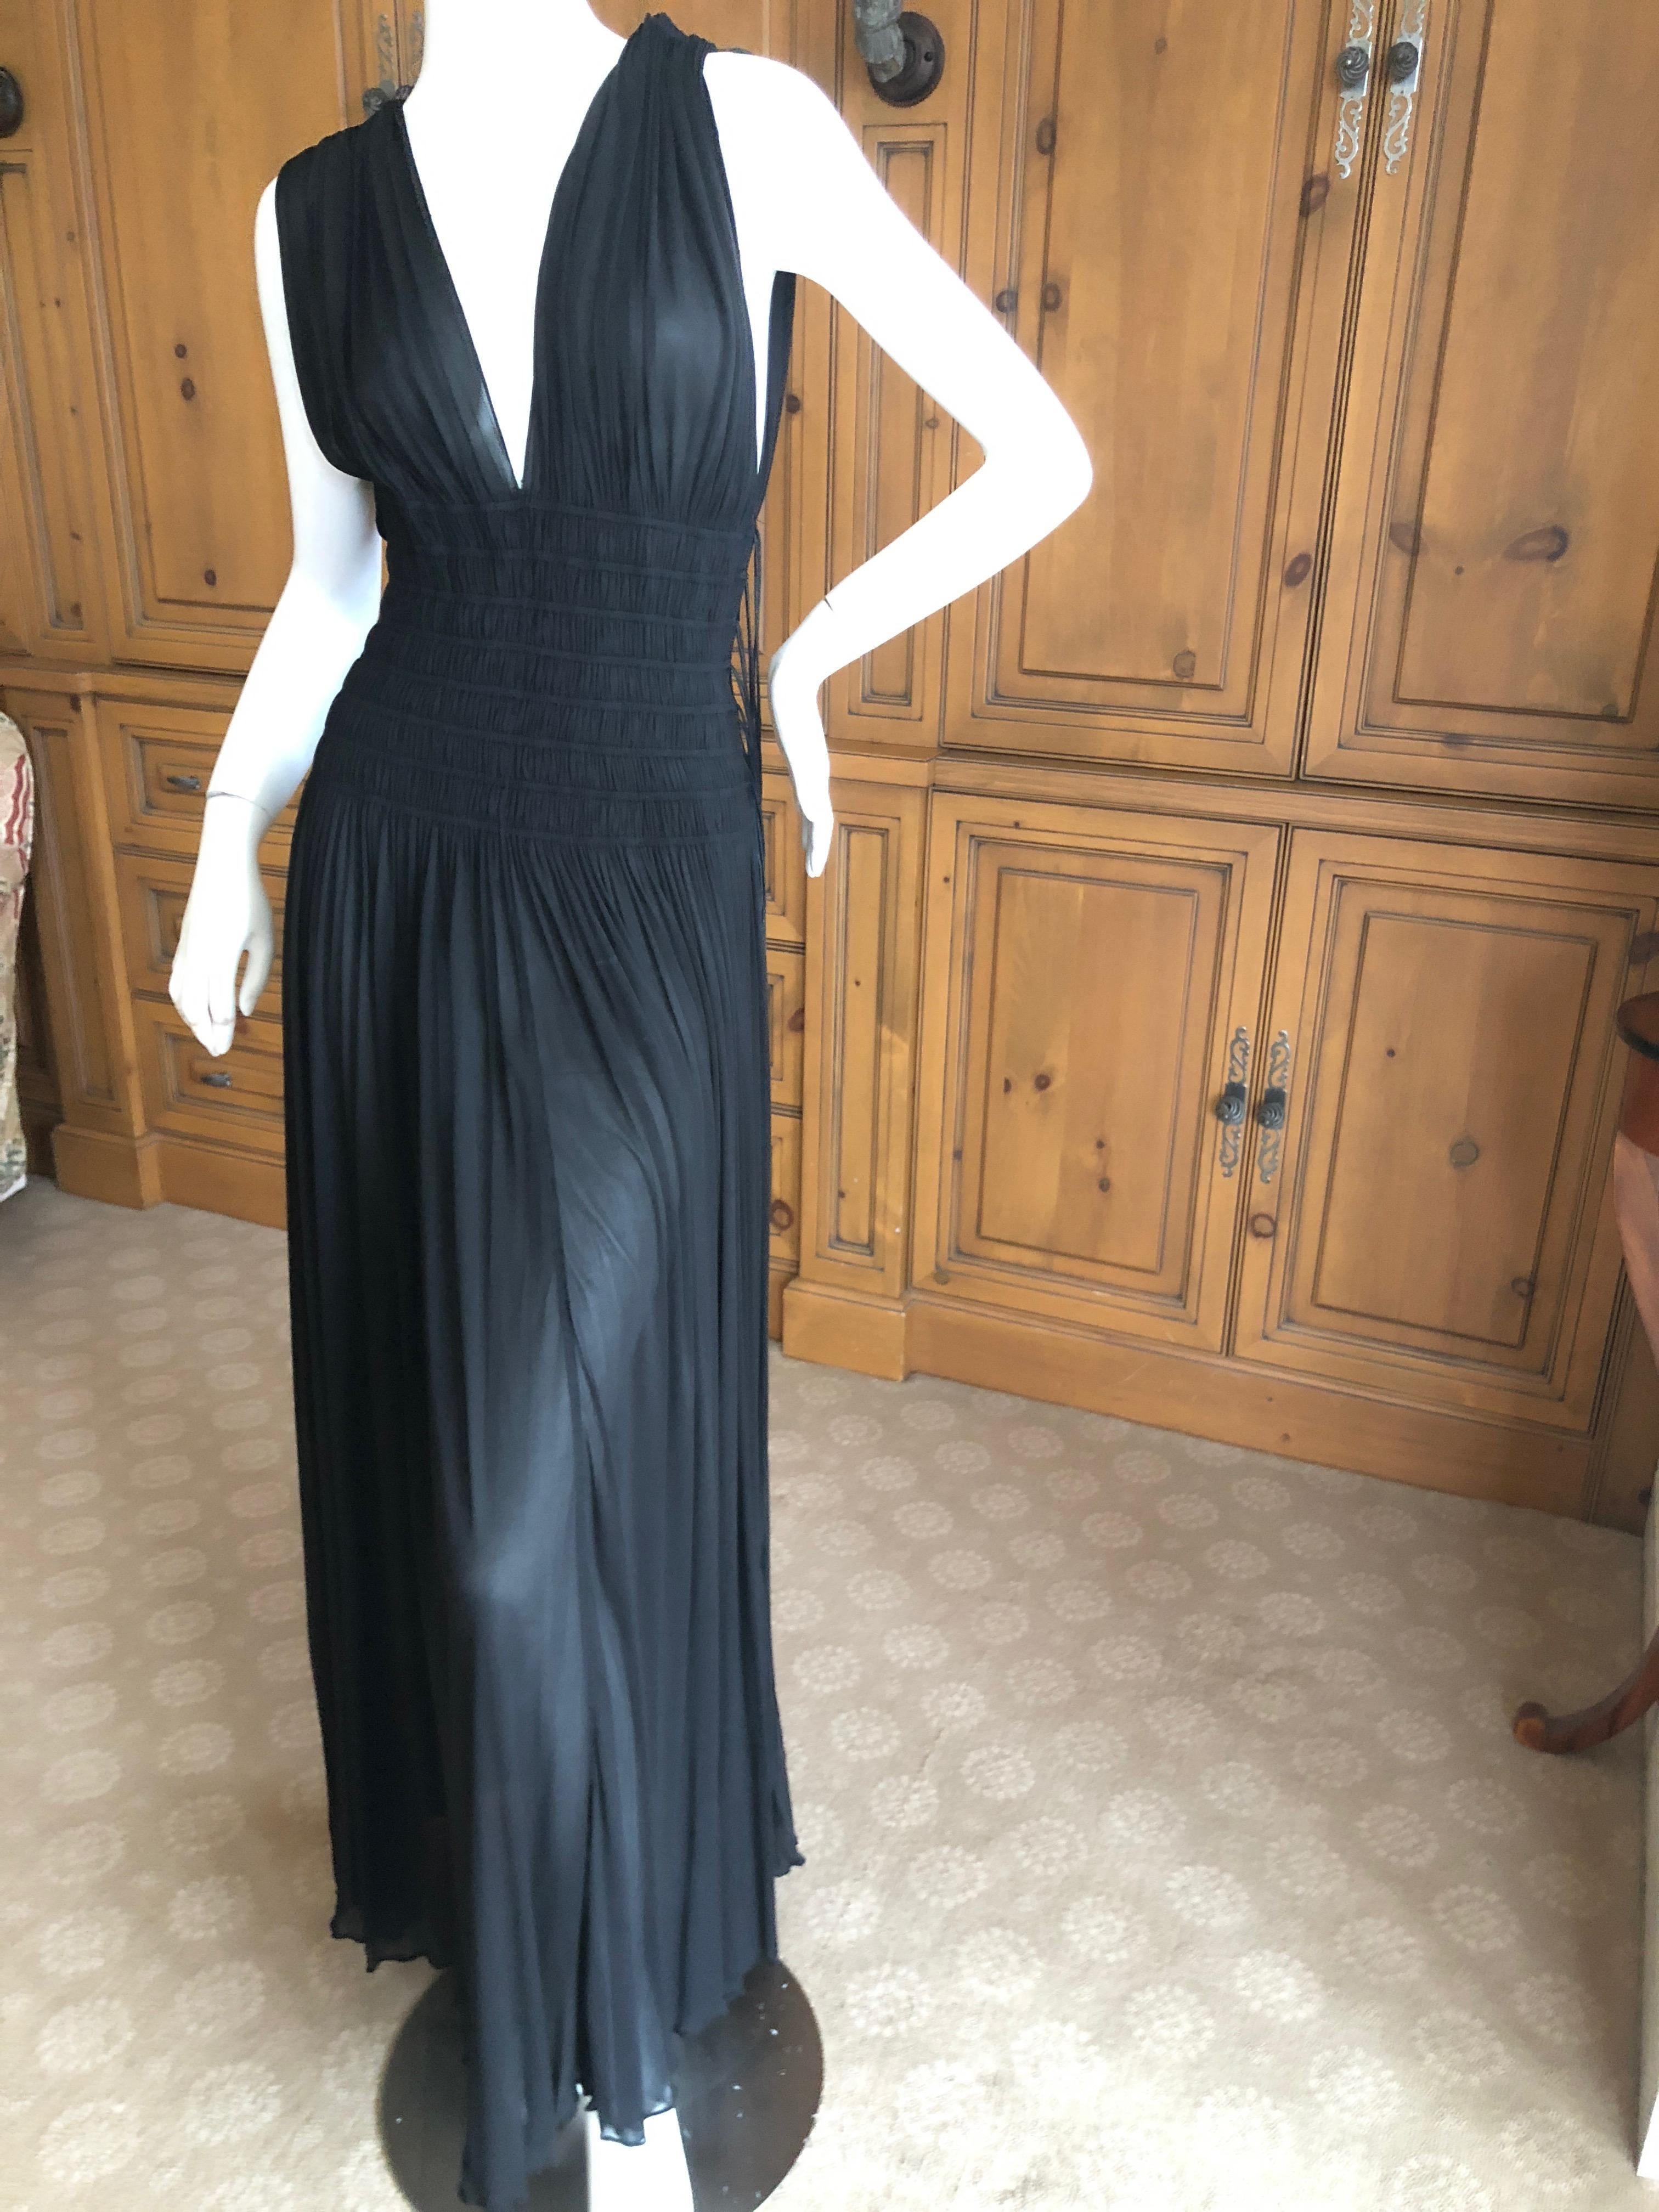 Azzedine Alaia Vintage Autumn 1991 Black Pleated Goddess Gown 
 Please see all the great vintage Alaia in my store.
Size tag missing, appx. size S M
 Bust 34